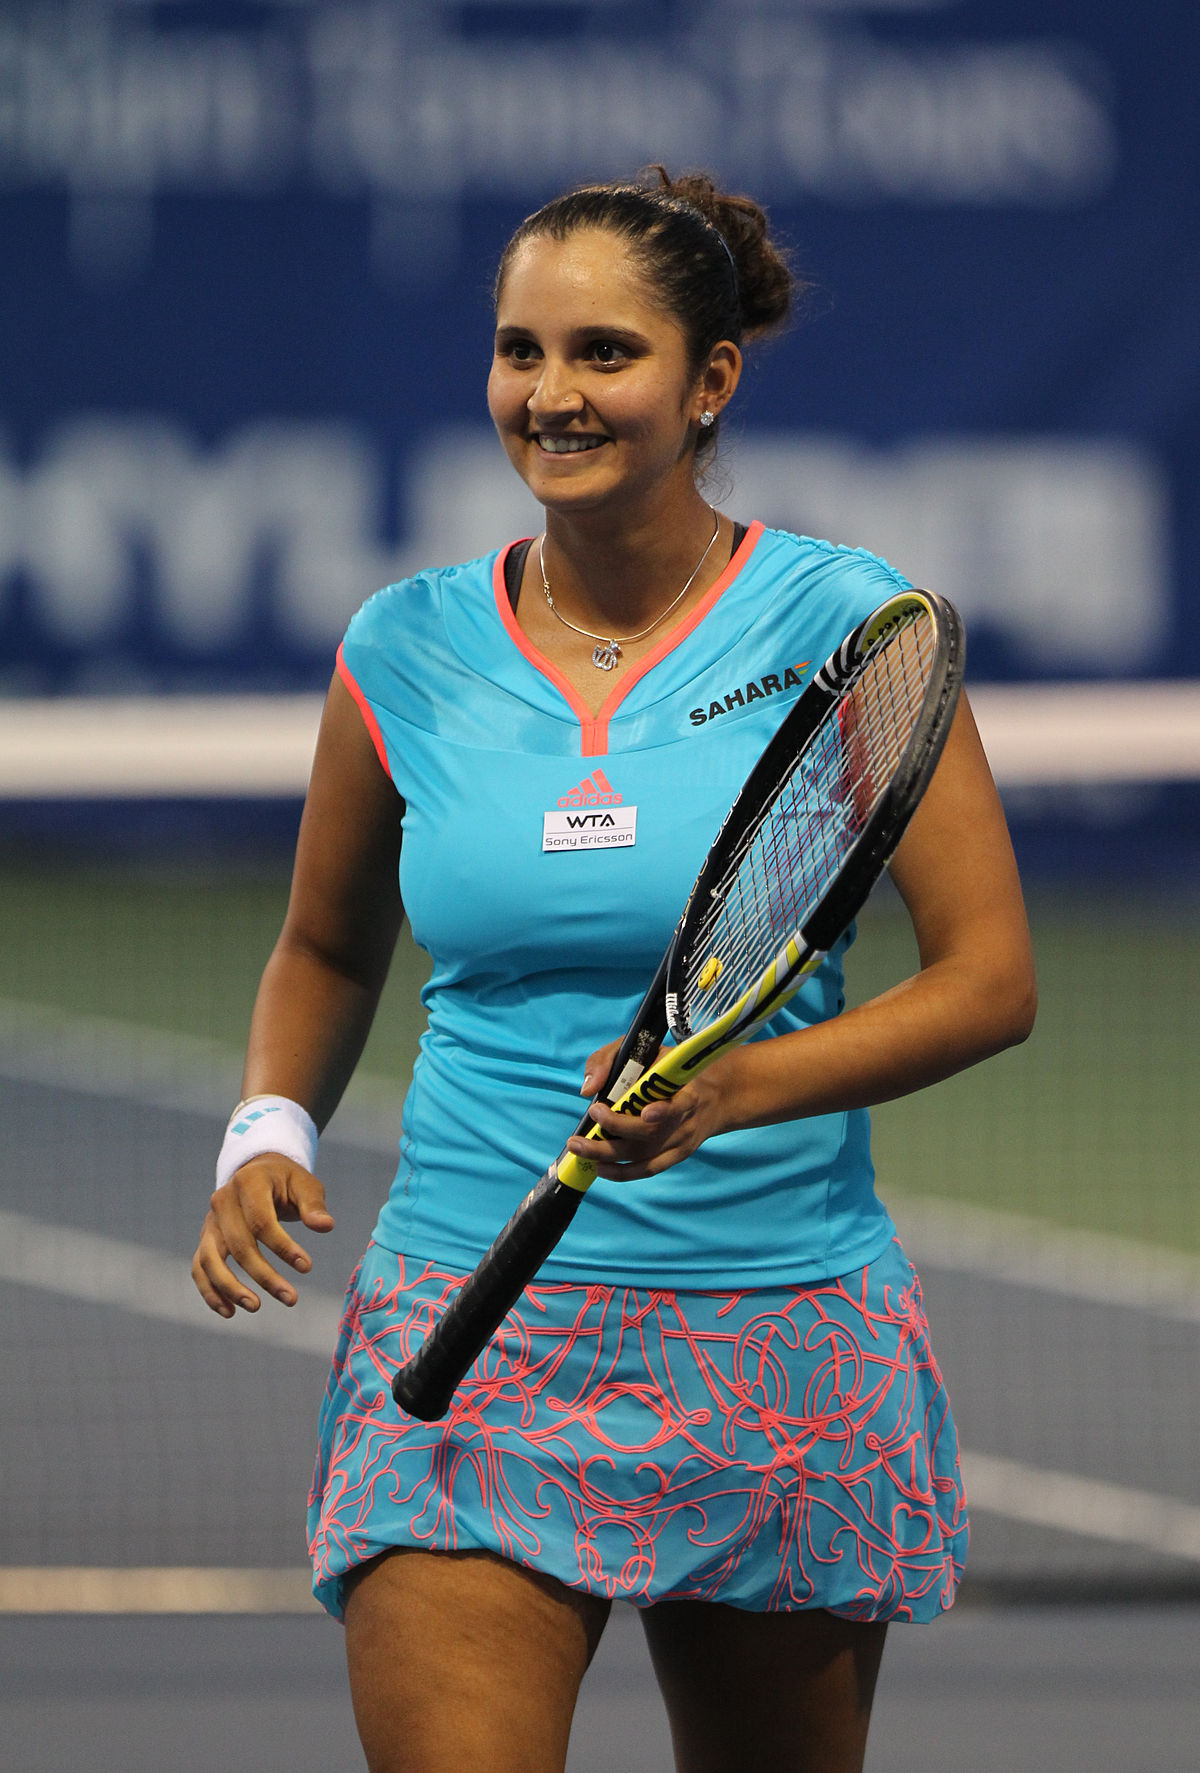 Sania Mirza Simple English Wikipedia The Free Encyclopedia She's on time's 100 most influential people in 2016. sania mirza simple english wikipedia